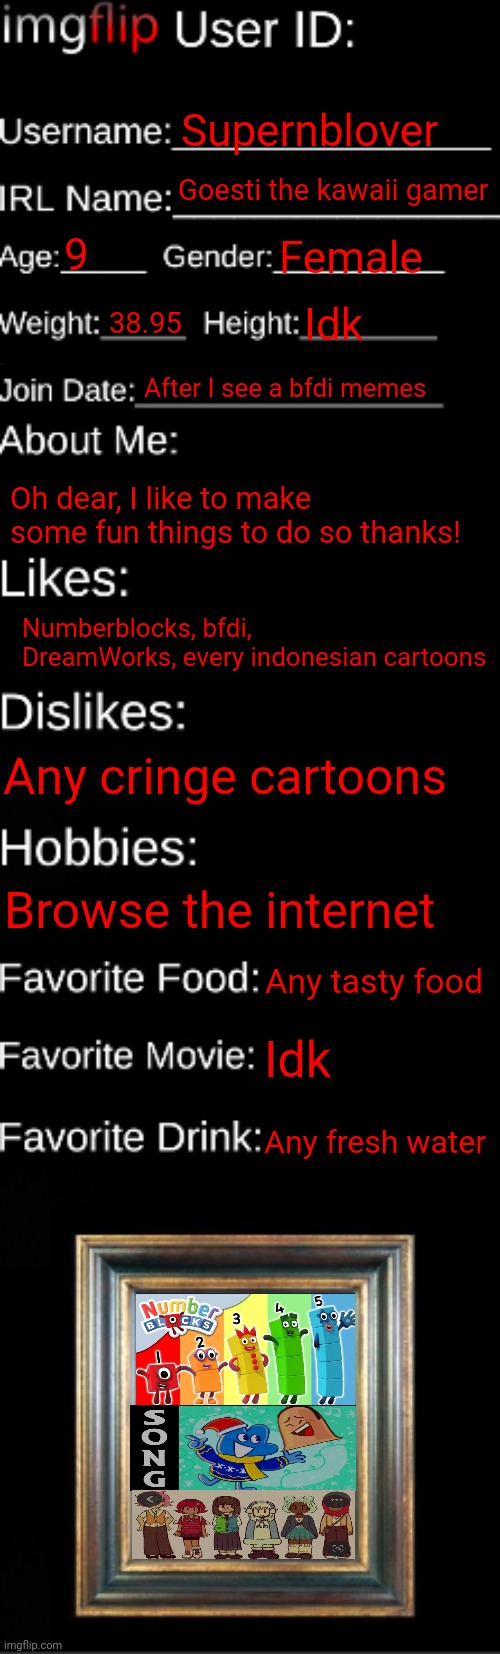 About me! | Supernblover; Goesti the kawaii gamer; 9; Female; 38.95; Idk; After I see a bfdi memes; Oh dear, I like to make some fun things to do so thanks! Numberblocks, bfdi, DreamWorks, every indonesian cartoons; Any cringe cartoons; Browse the internet; Any tasty food; Idk; Any fresh water | image tagged in imgflip id card | made w/ Imgflip meme maker